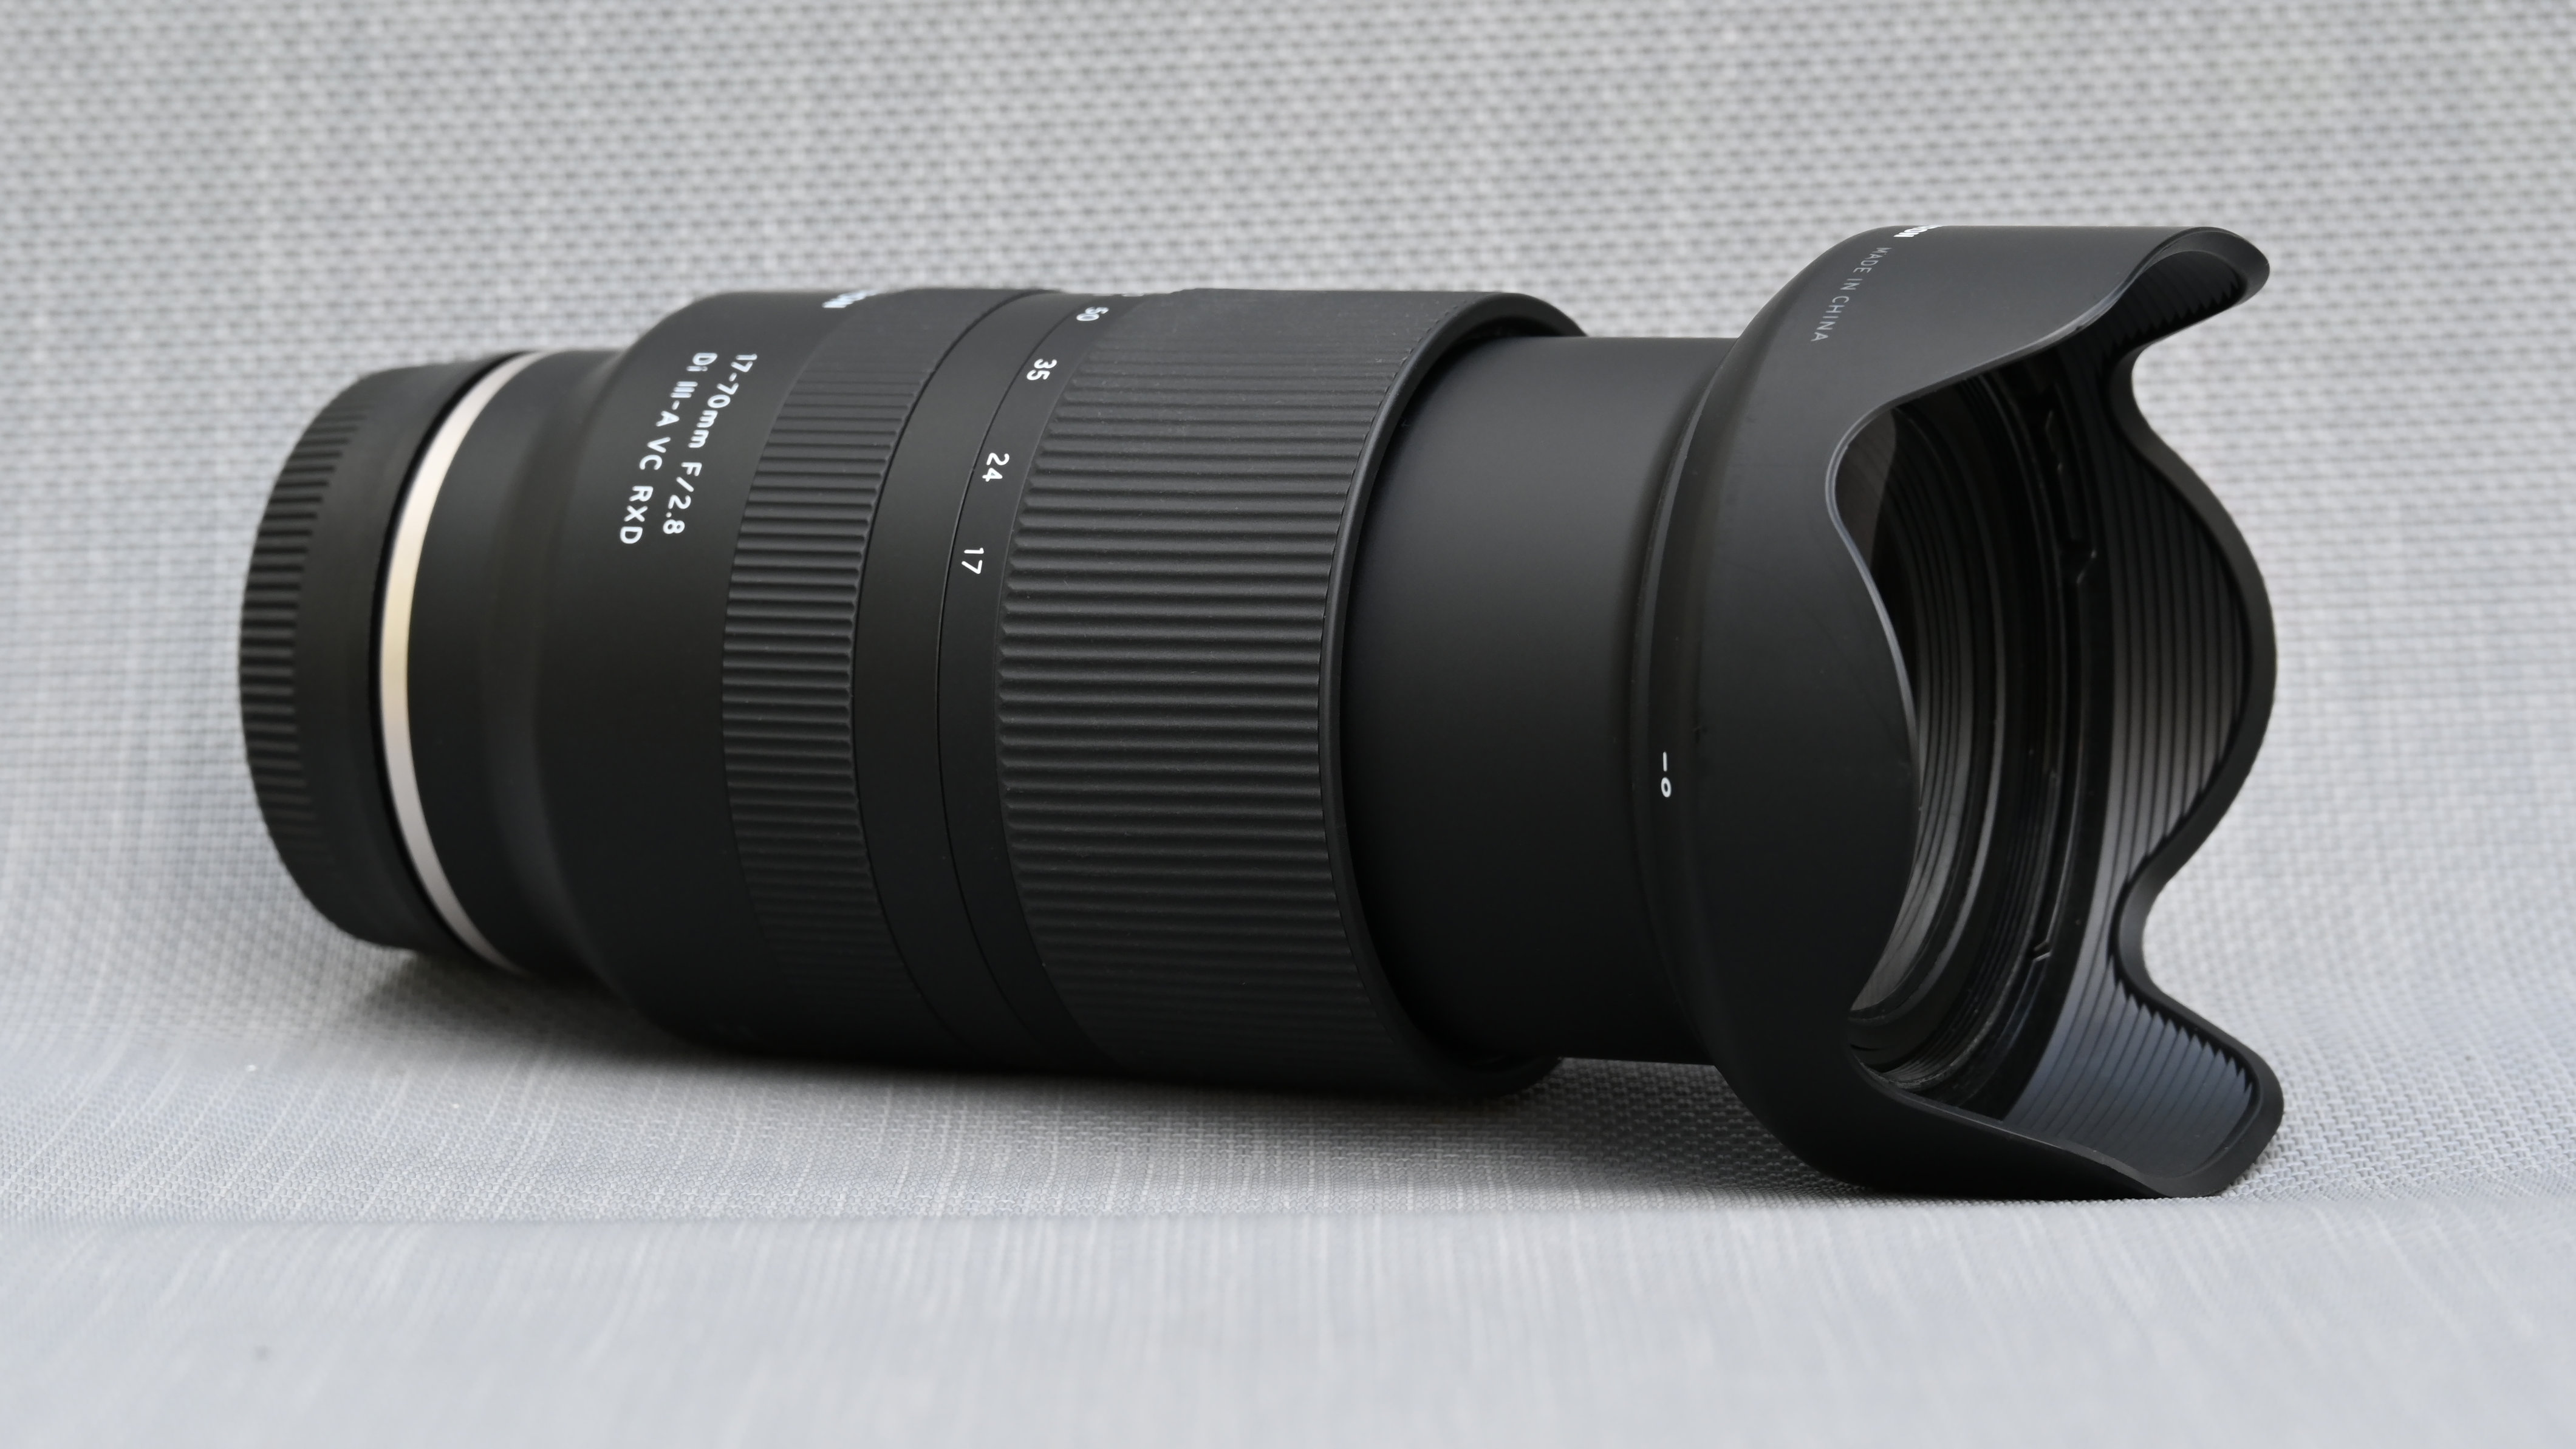 Tamron 17-70mm f/2.8 Di III-A VC RXD APS-C Lens for Sony E-Mount {67} B070  at KEH Camera